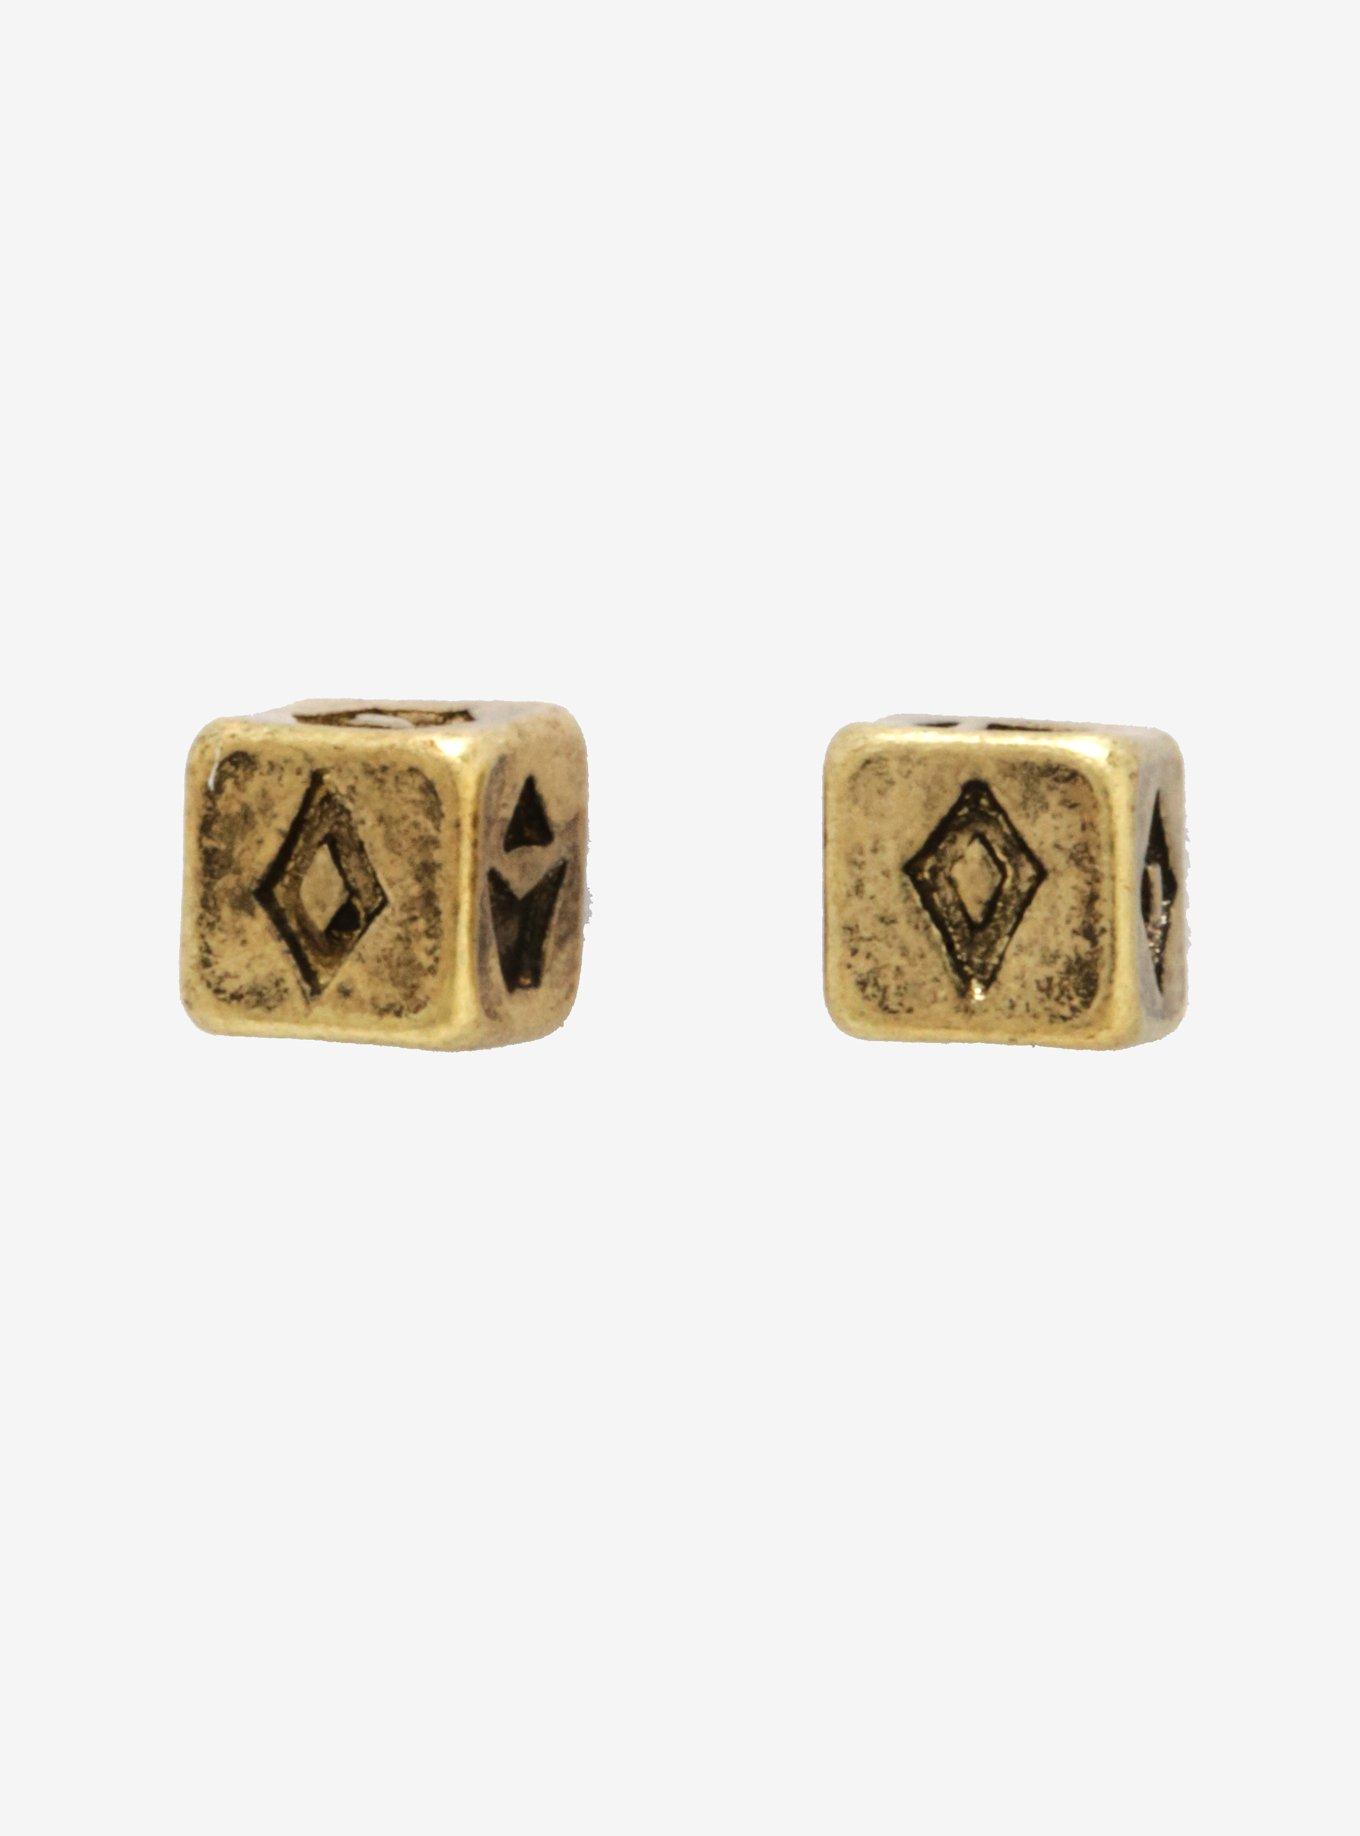 Solo: A Star Wars Story Dice Earrings - BoxLunch Exclusive, , alternate